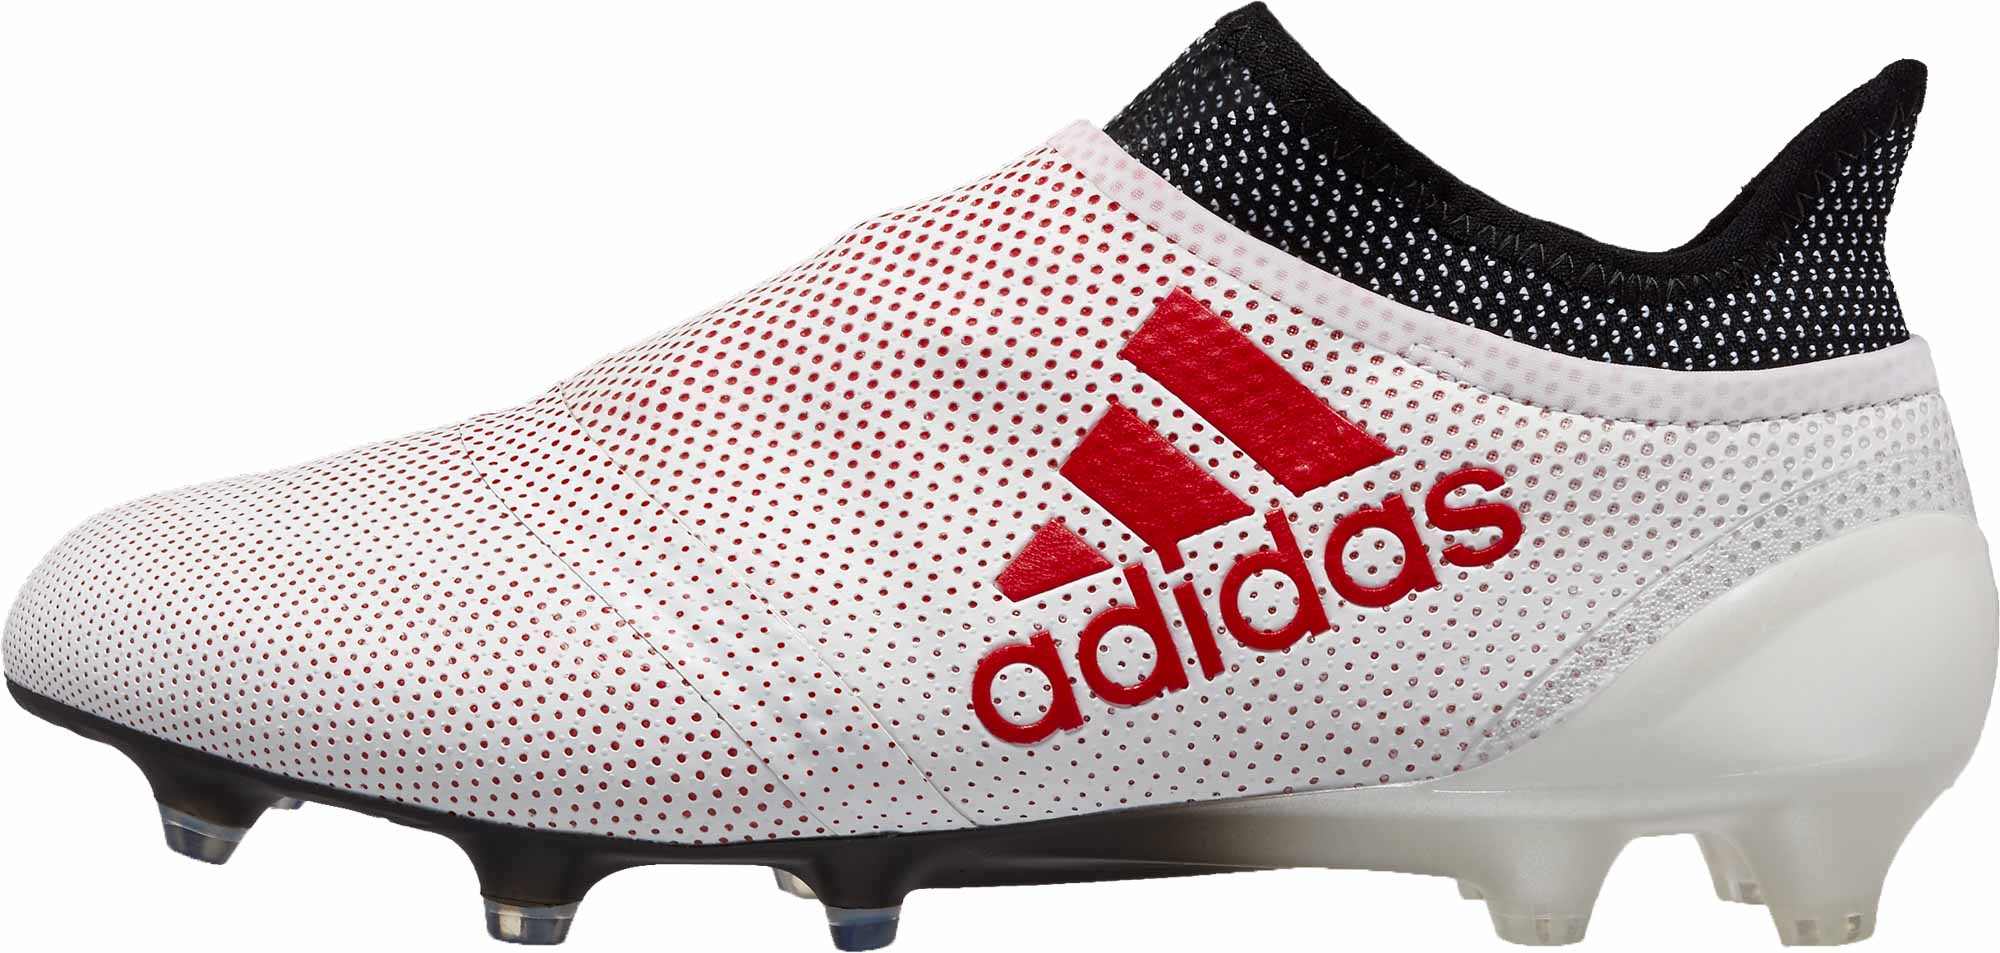 adidas x 17 cold blooded